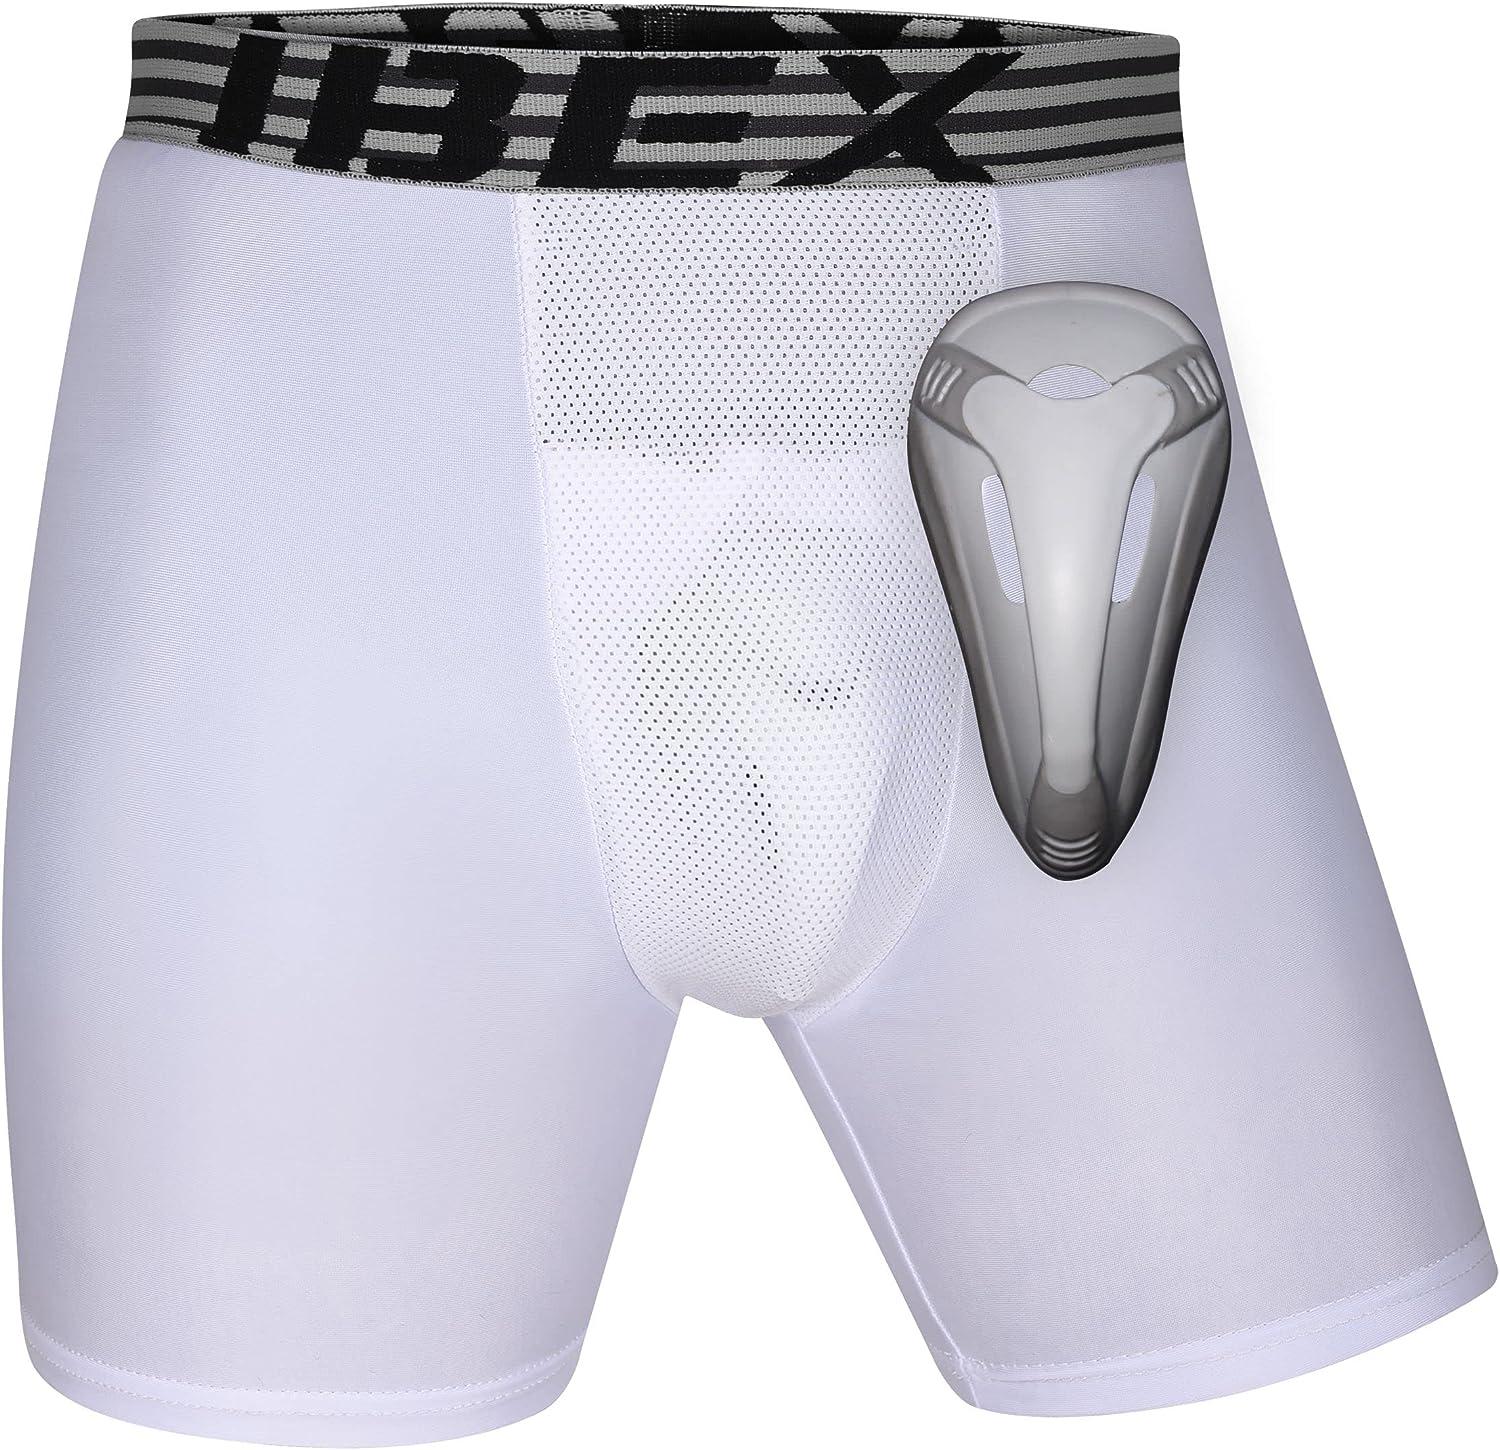 Youth Cup Underwear Youth Boys Baseball Cup Briefs With Soft Protective  Athletic Cup Baseball, Football, Lacrosse